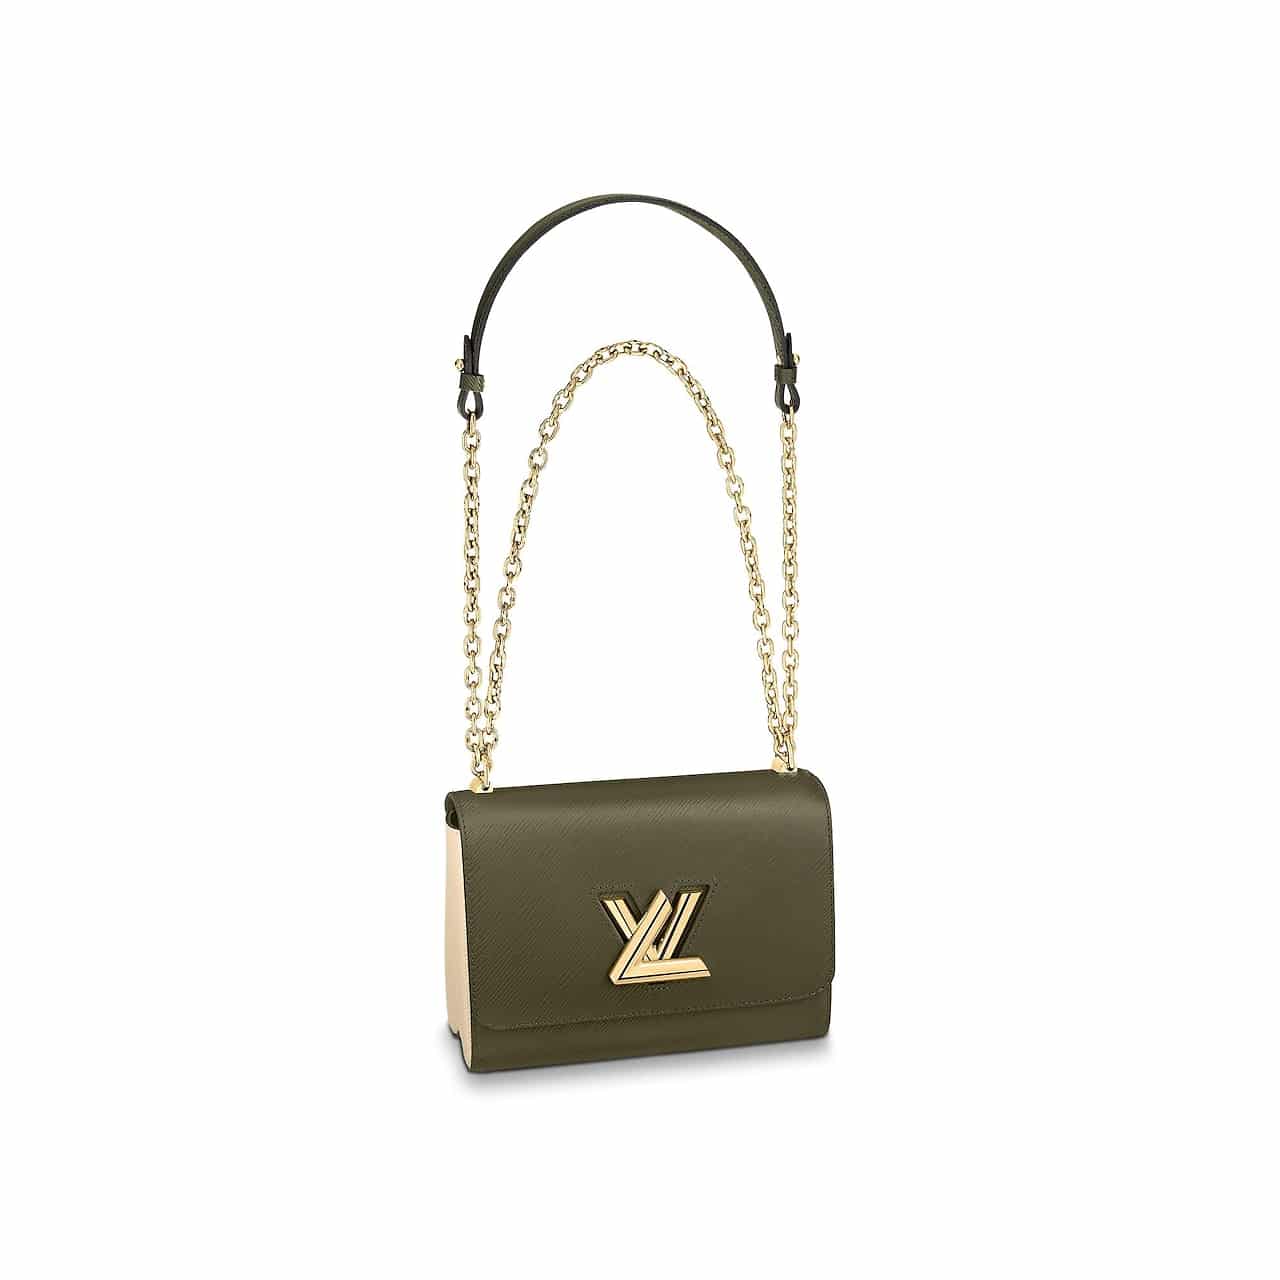 Louis Vuitton Twist Bag Collection, Seasonal variations. The Twist is the Louis  Vuitton New Classic bag that is full of surprises. Find the latest  collection online and in Louis Vuitton stores.